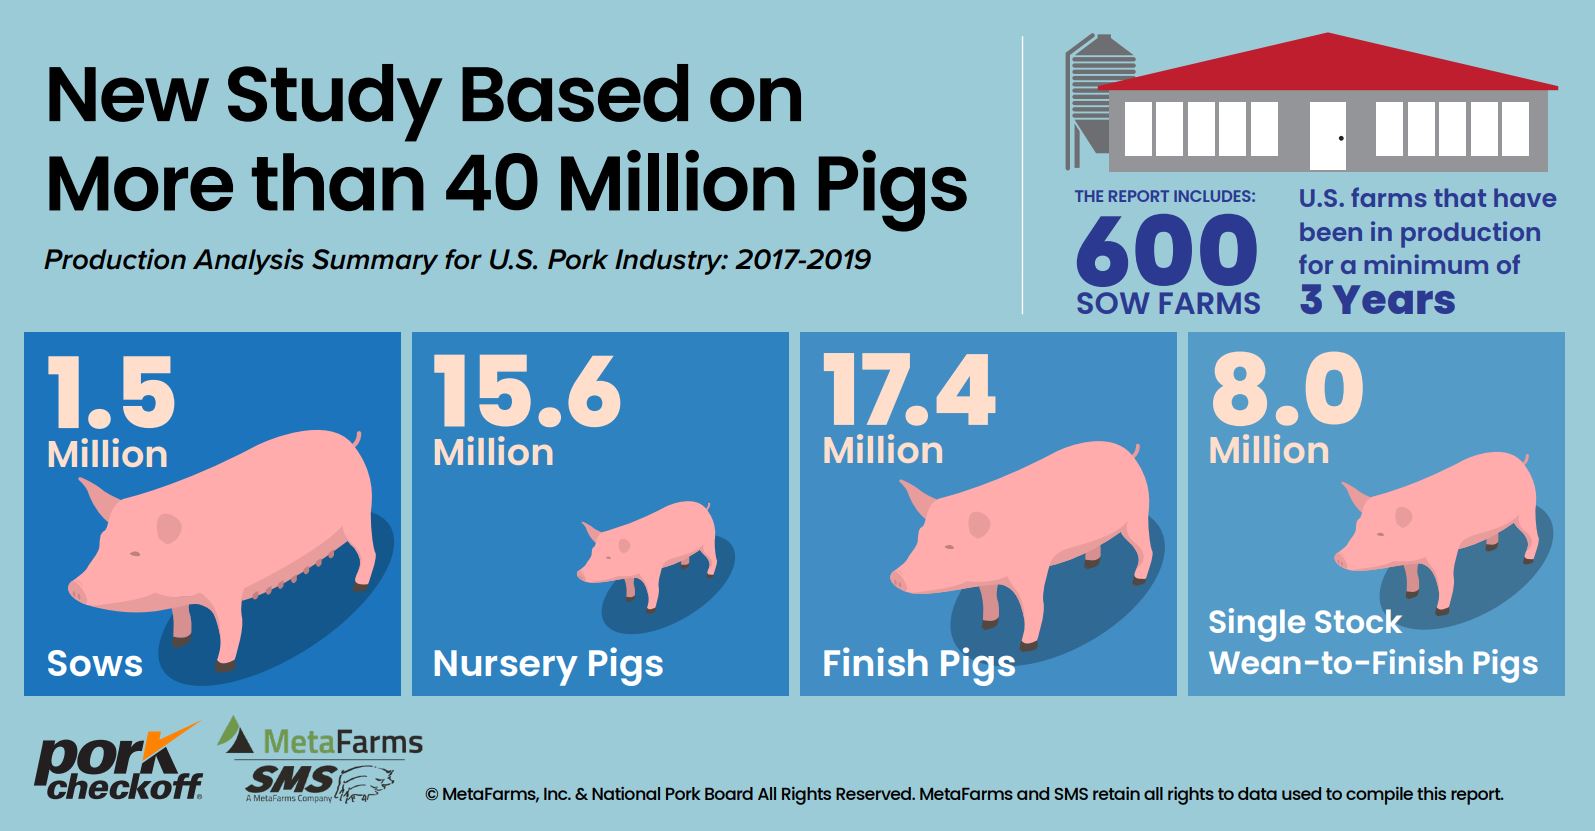 Researchers compiled data from millions of pigs from all phases of production that had been in production for a minimum of three years to establish multi-year comparison analysis to ensure an accurate picture of the productivity of the national swine herd. The 2019 dataset represents 1,588,246 sows across 600 farms, as well as 15,666,136 nursery pigs, 17,479,763 finish pigs and 8,023,610 single-stock wean-to-finish pigs.  ﻿